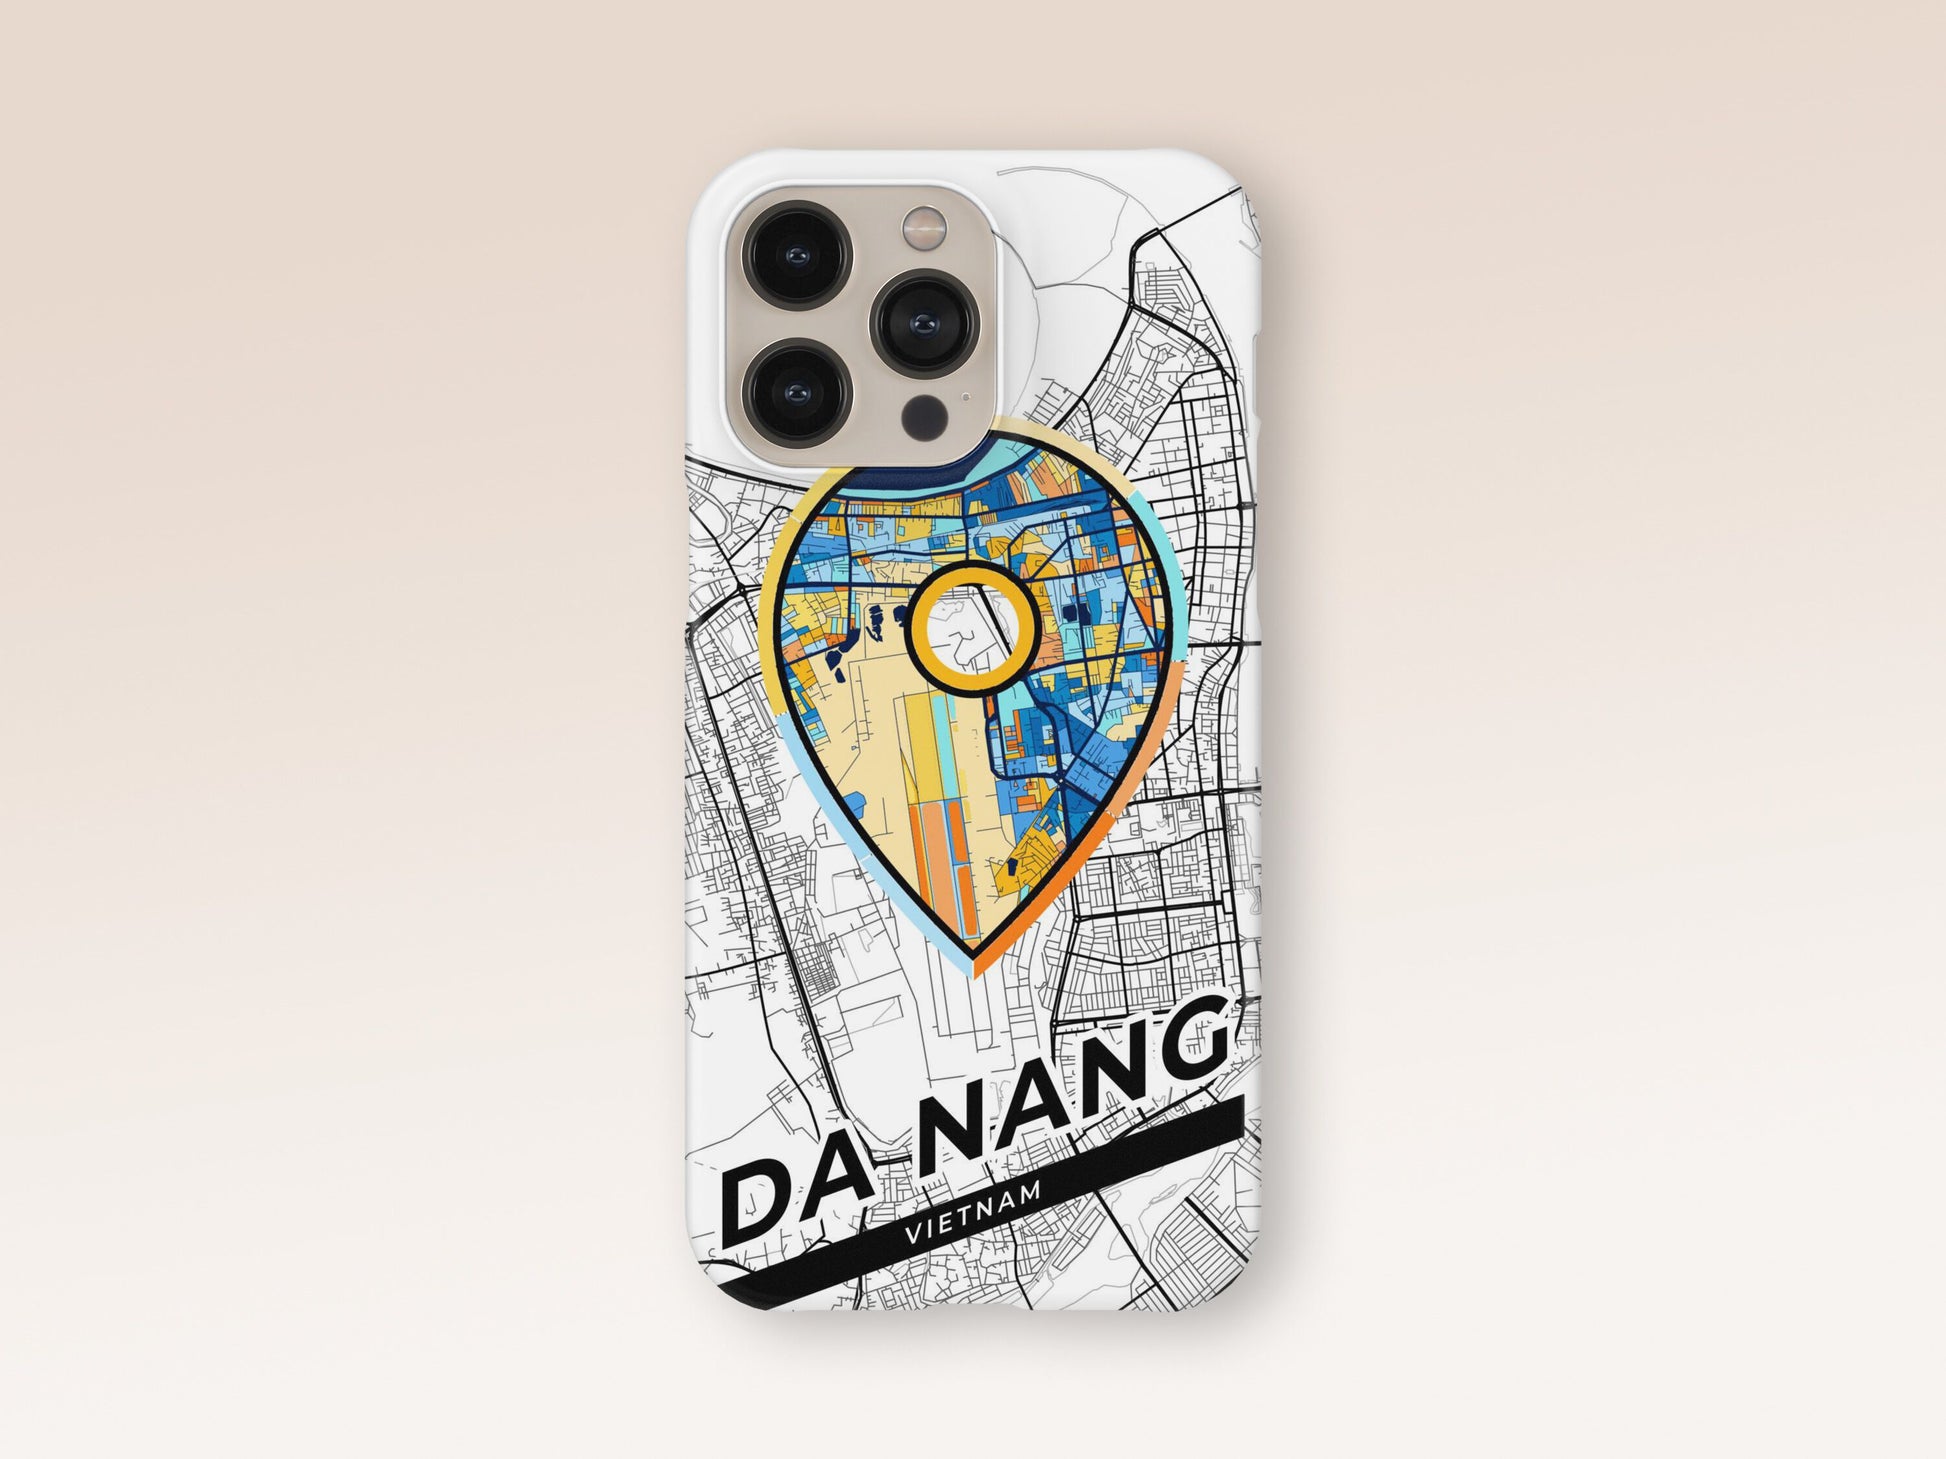 Da Nang Vietnam slim phone case with colorful icon. Birthday, wedding or housewarming gift. Couple match cases. 1